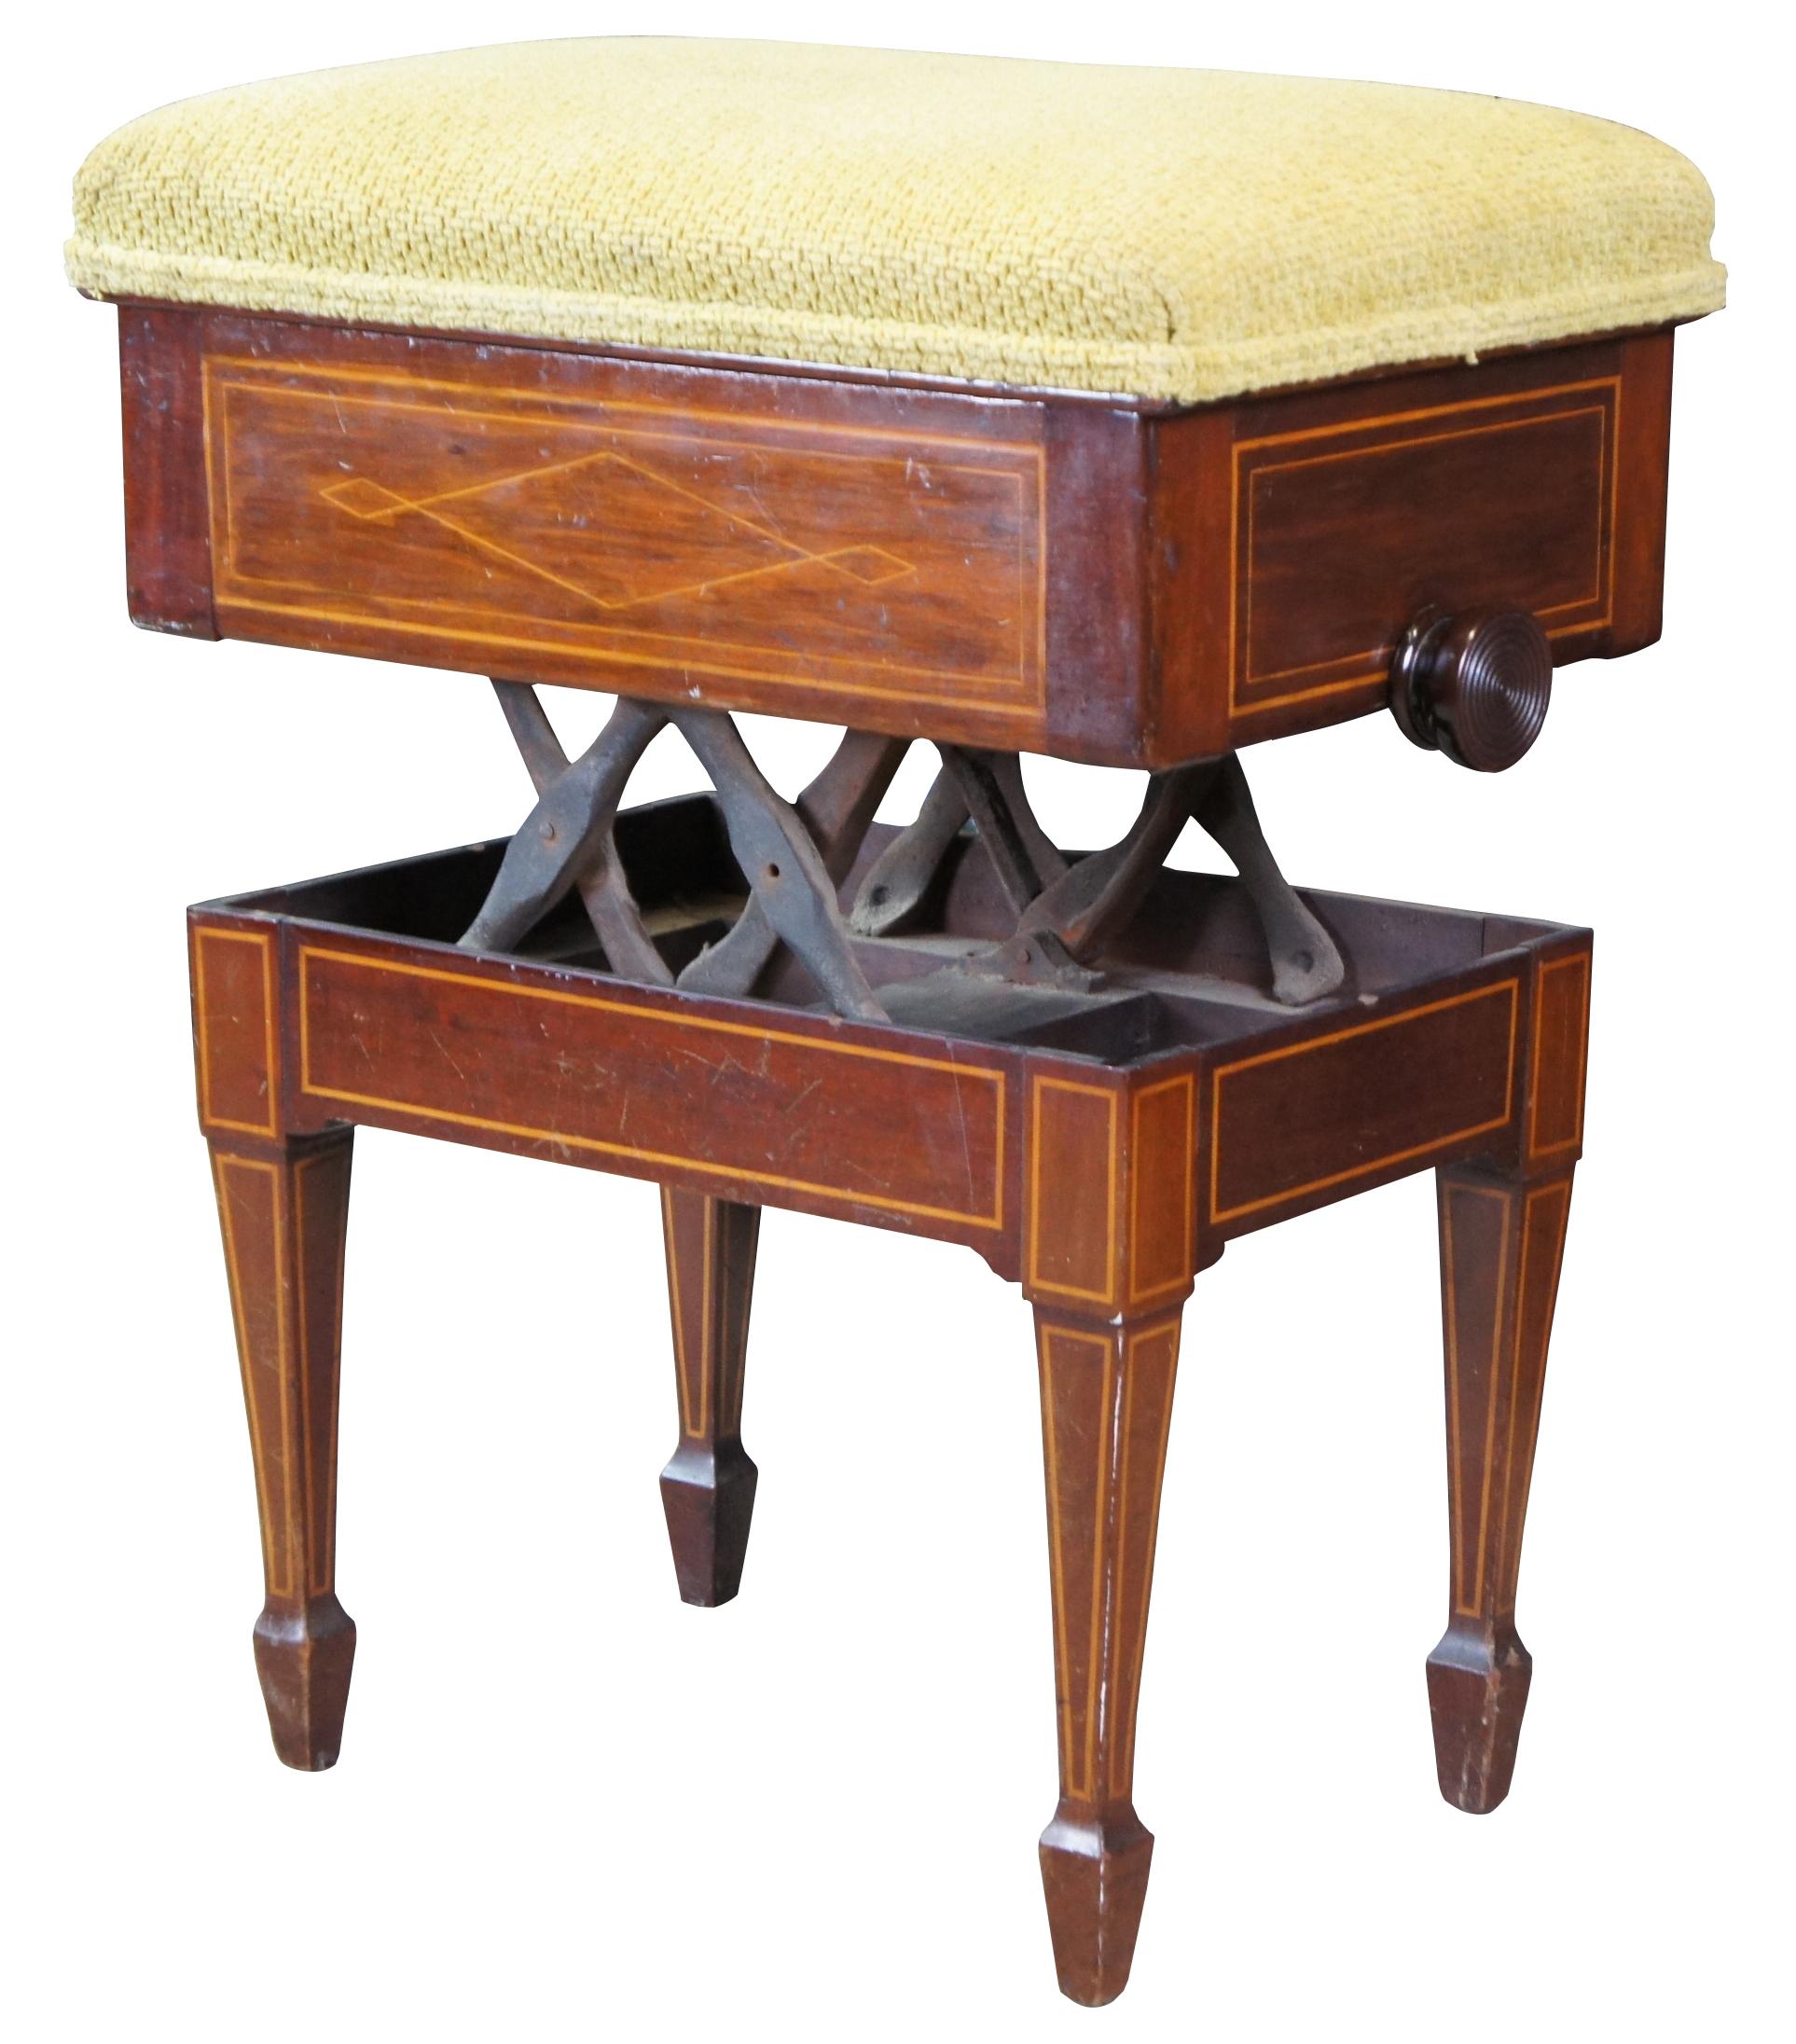 Early 1900s Edwardian artists organ, vanity or piano stool. A rectangular form made from mahogany with elegant inlay and upholstered seat. Features an adjustable seat that raises by scrolling side handles. Upholstered seat lifts up to allow for